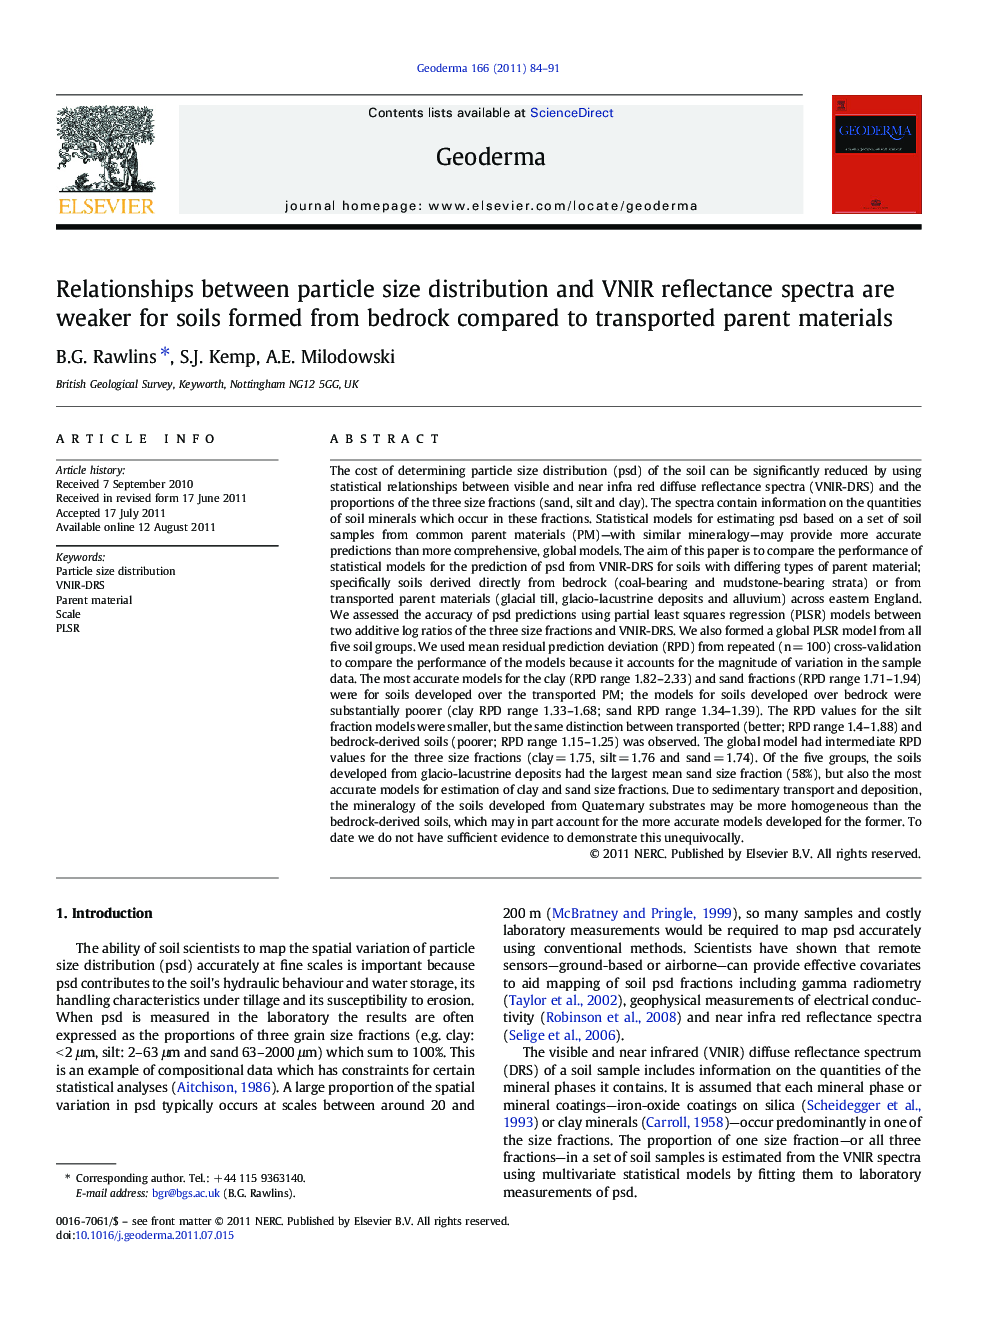 Relationships between particle size distribution and VNIR reflectance spectra are weaker for soils formed from bedrock compared to transported parent materials